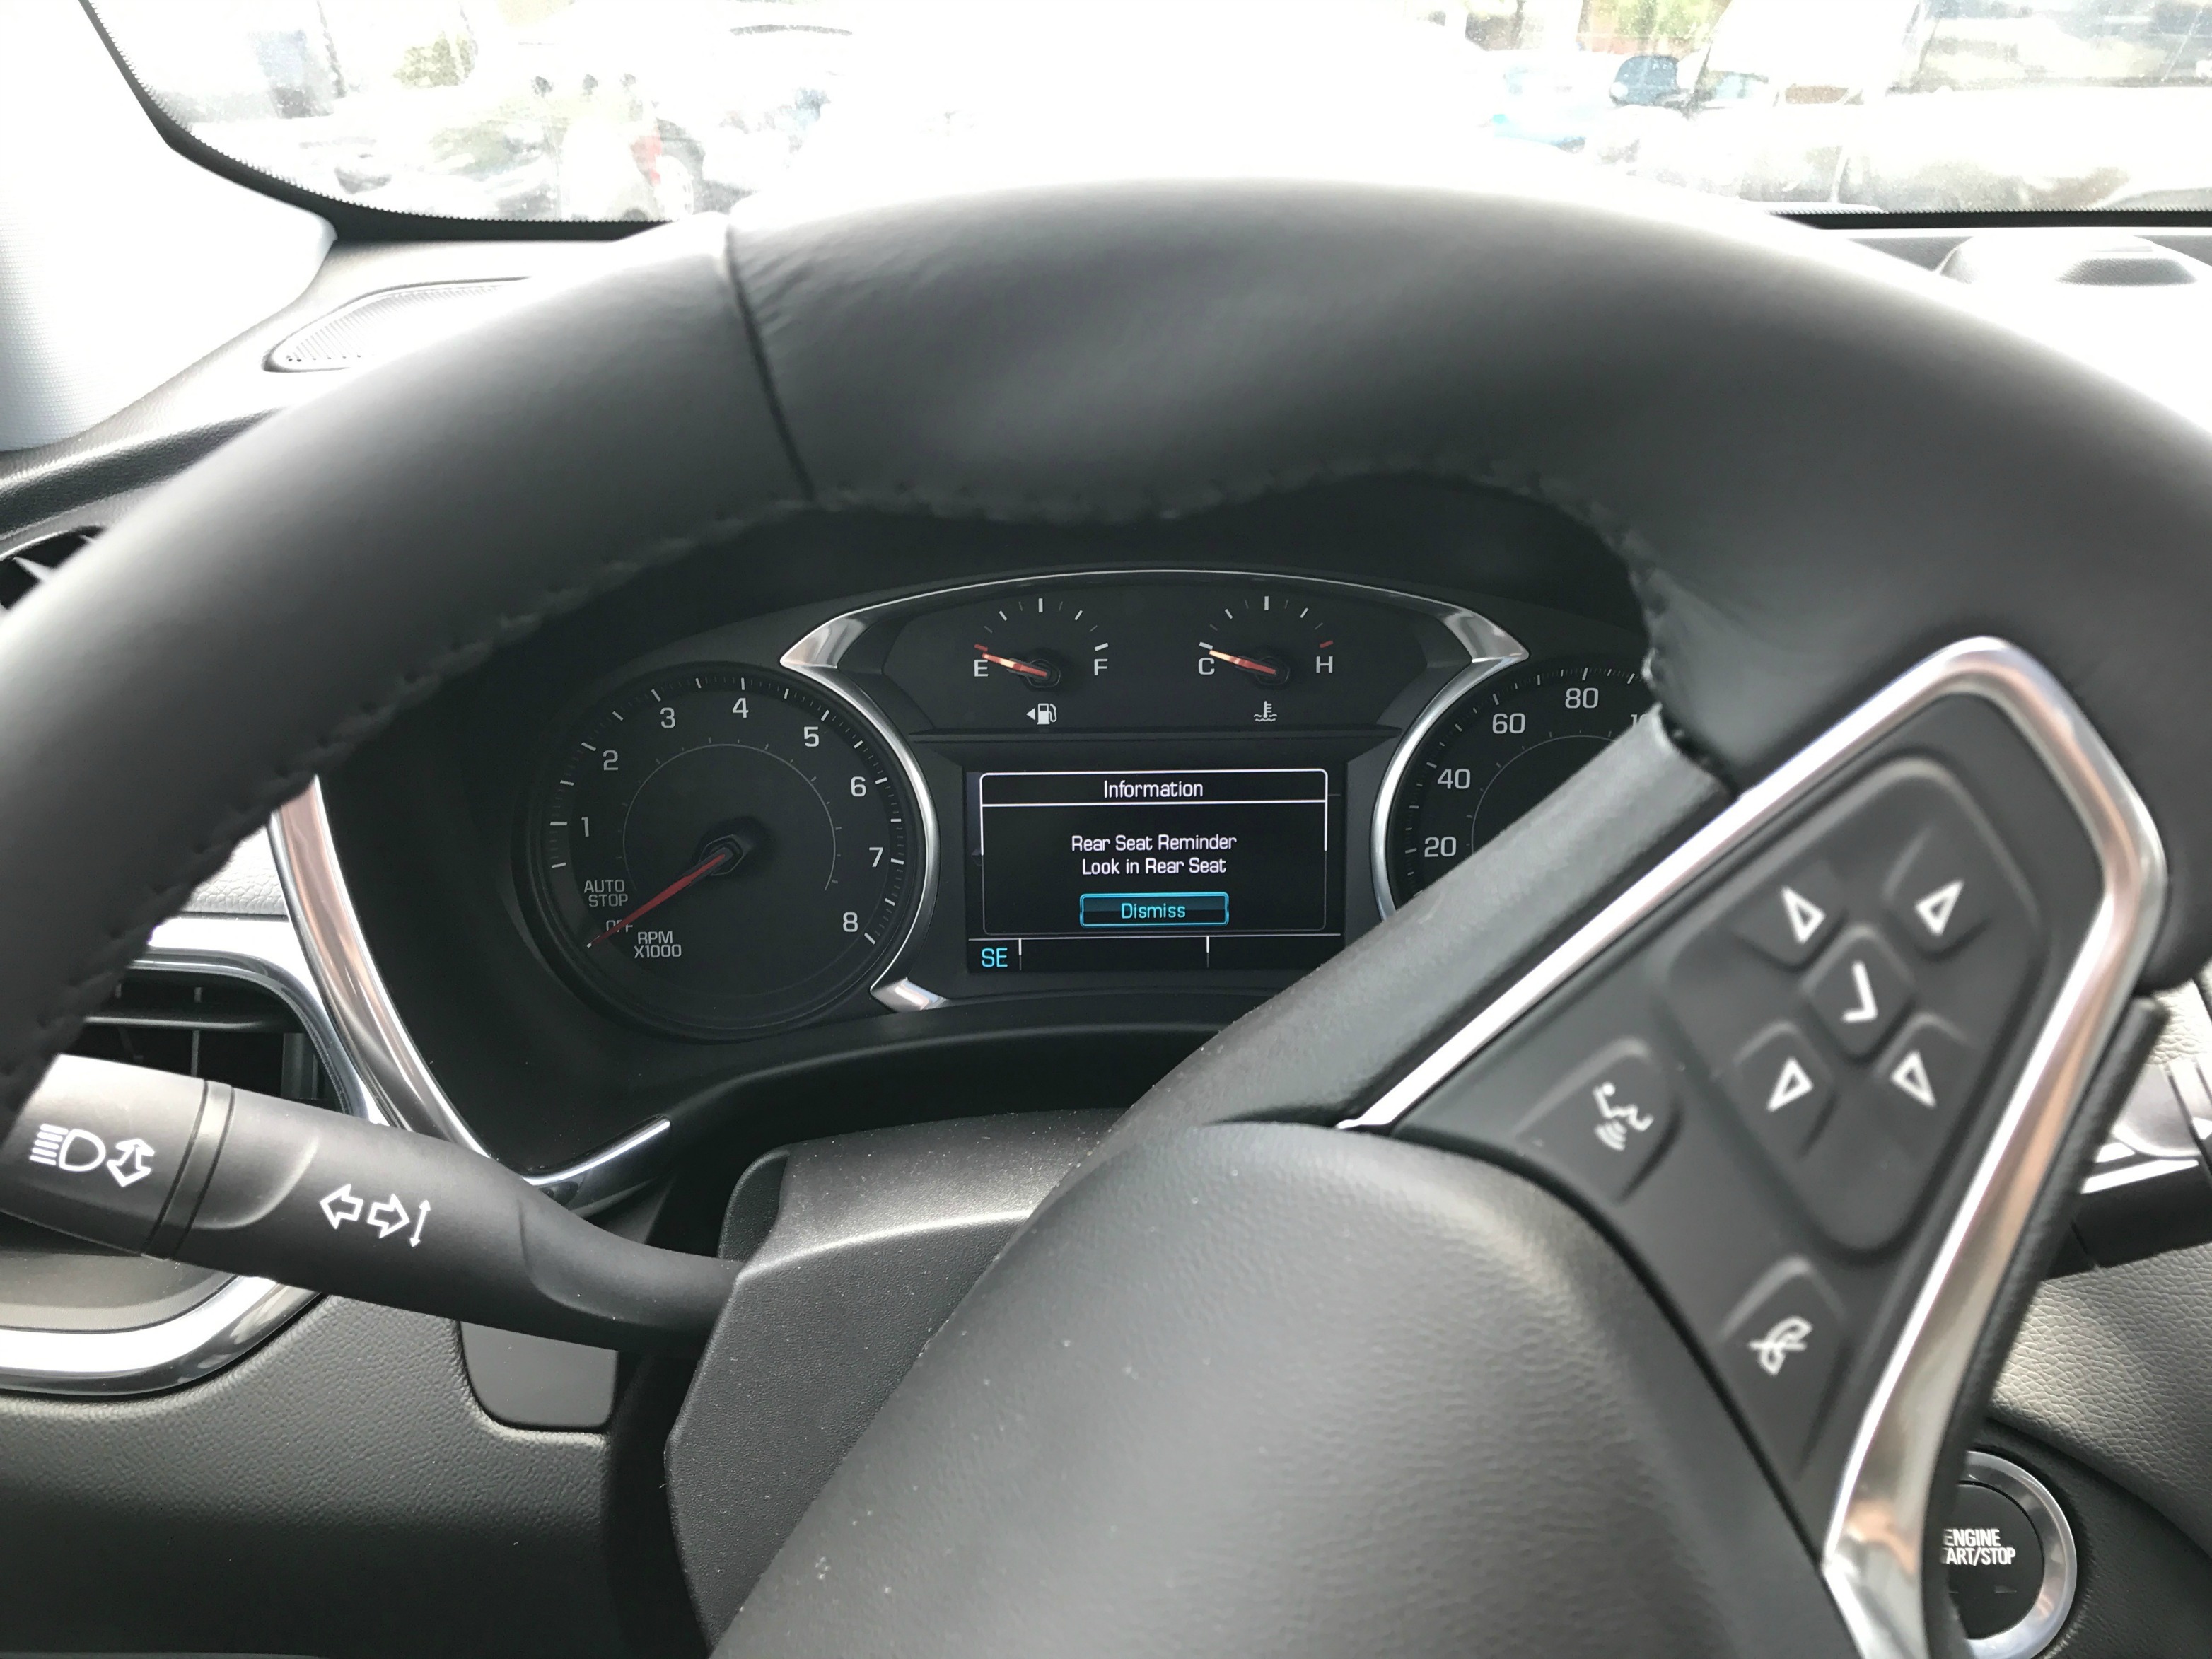 Safety features are important. Here are what I think are the top safety features of the 2018 Chevrolet Equinox.